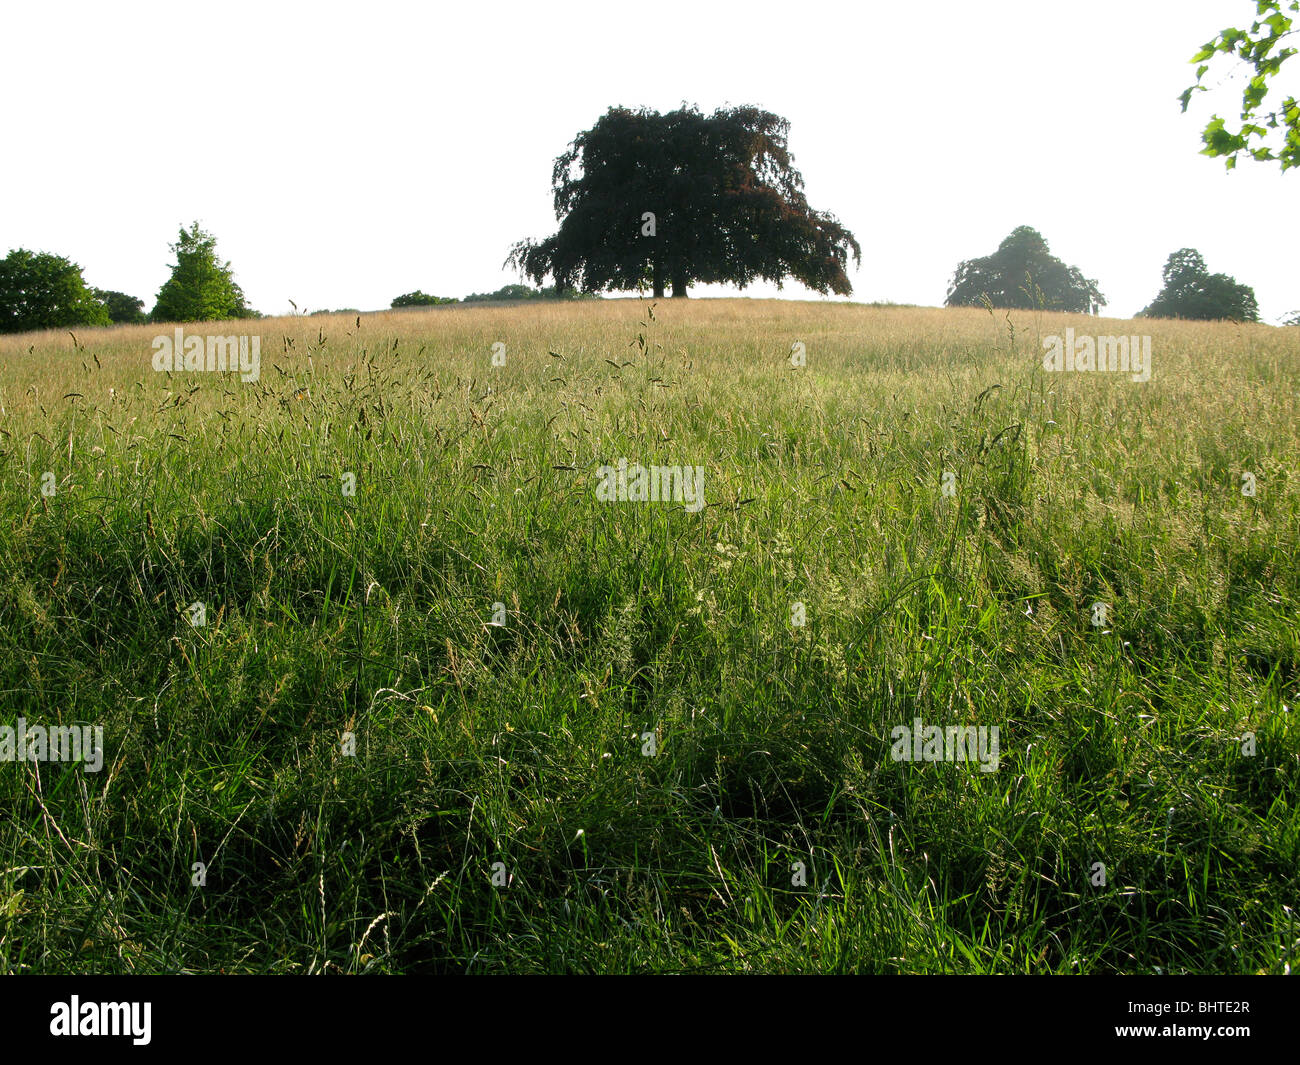 A tree in long grass in summertime Stock Photo